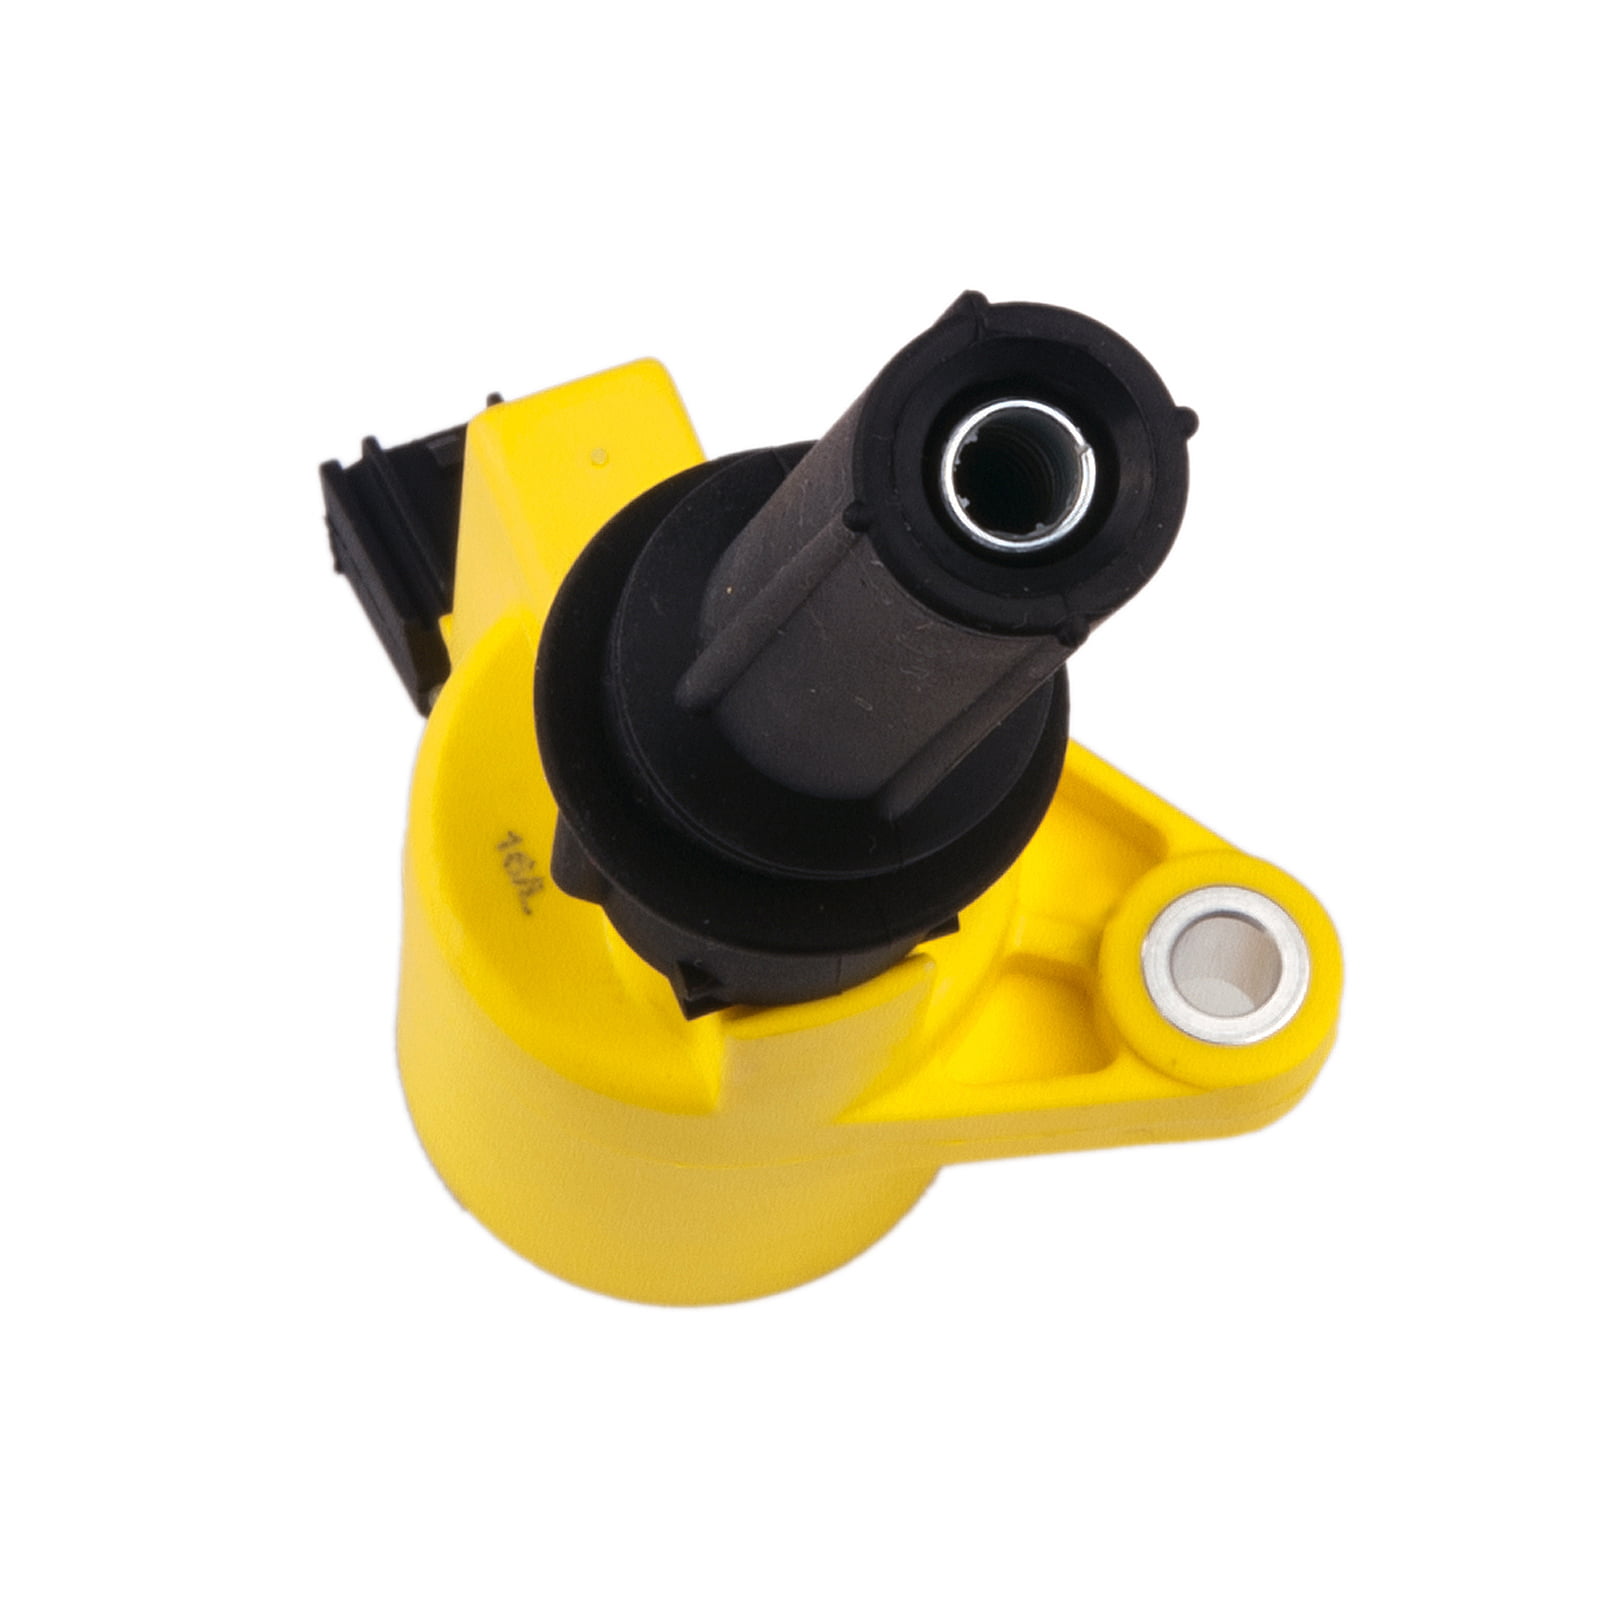 8 Heavy Duty Ignition Coil DG-508 YELLOW